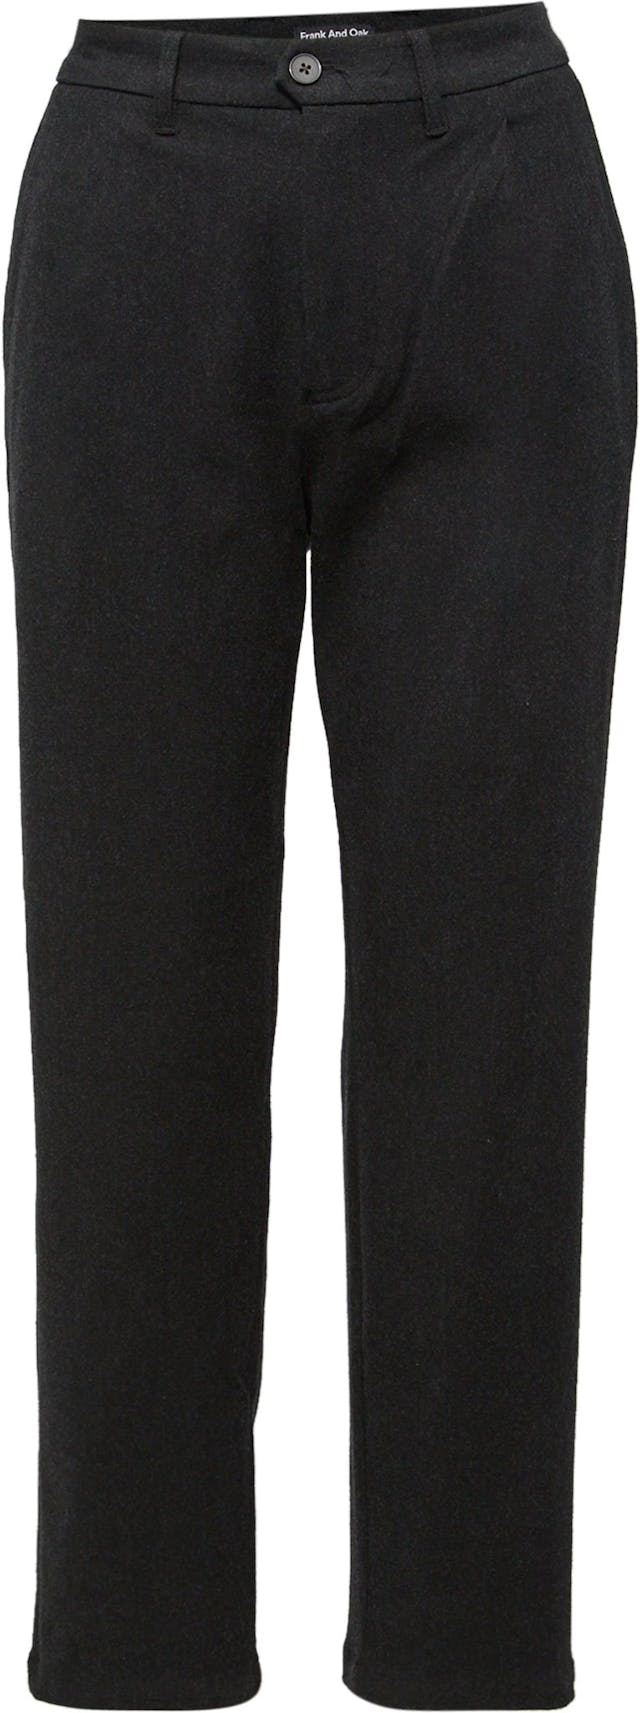 Product image for Pleated Flex Pant - Men's